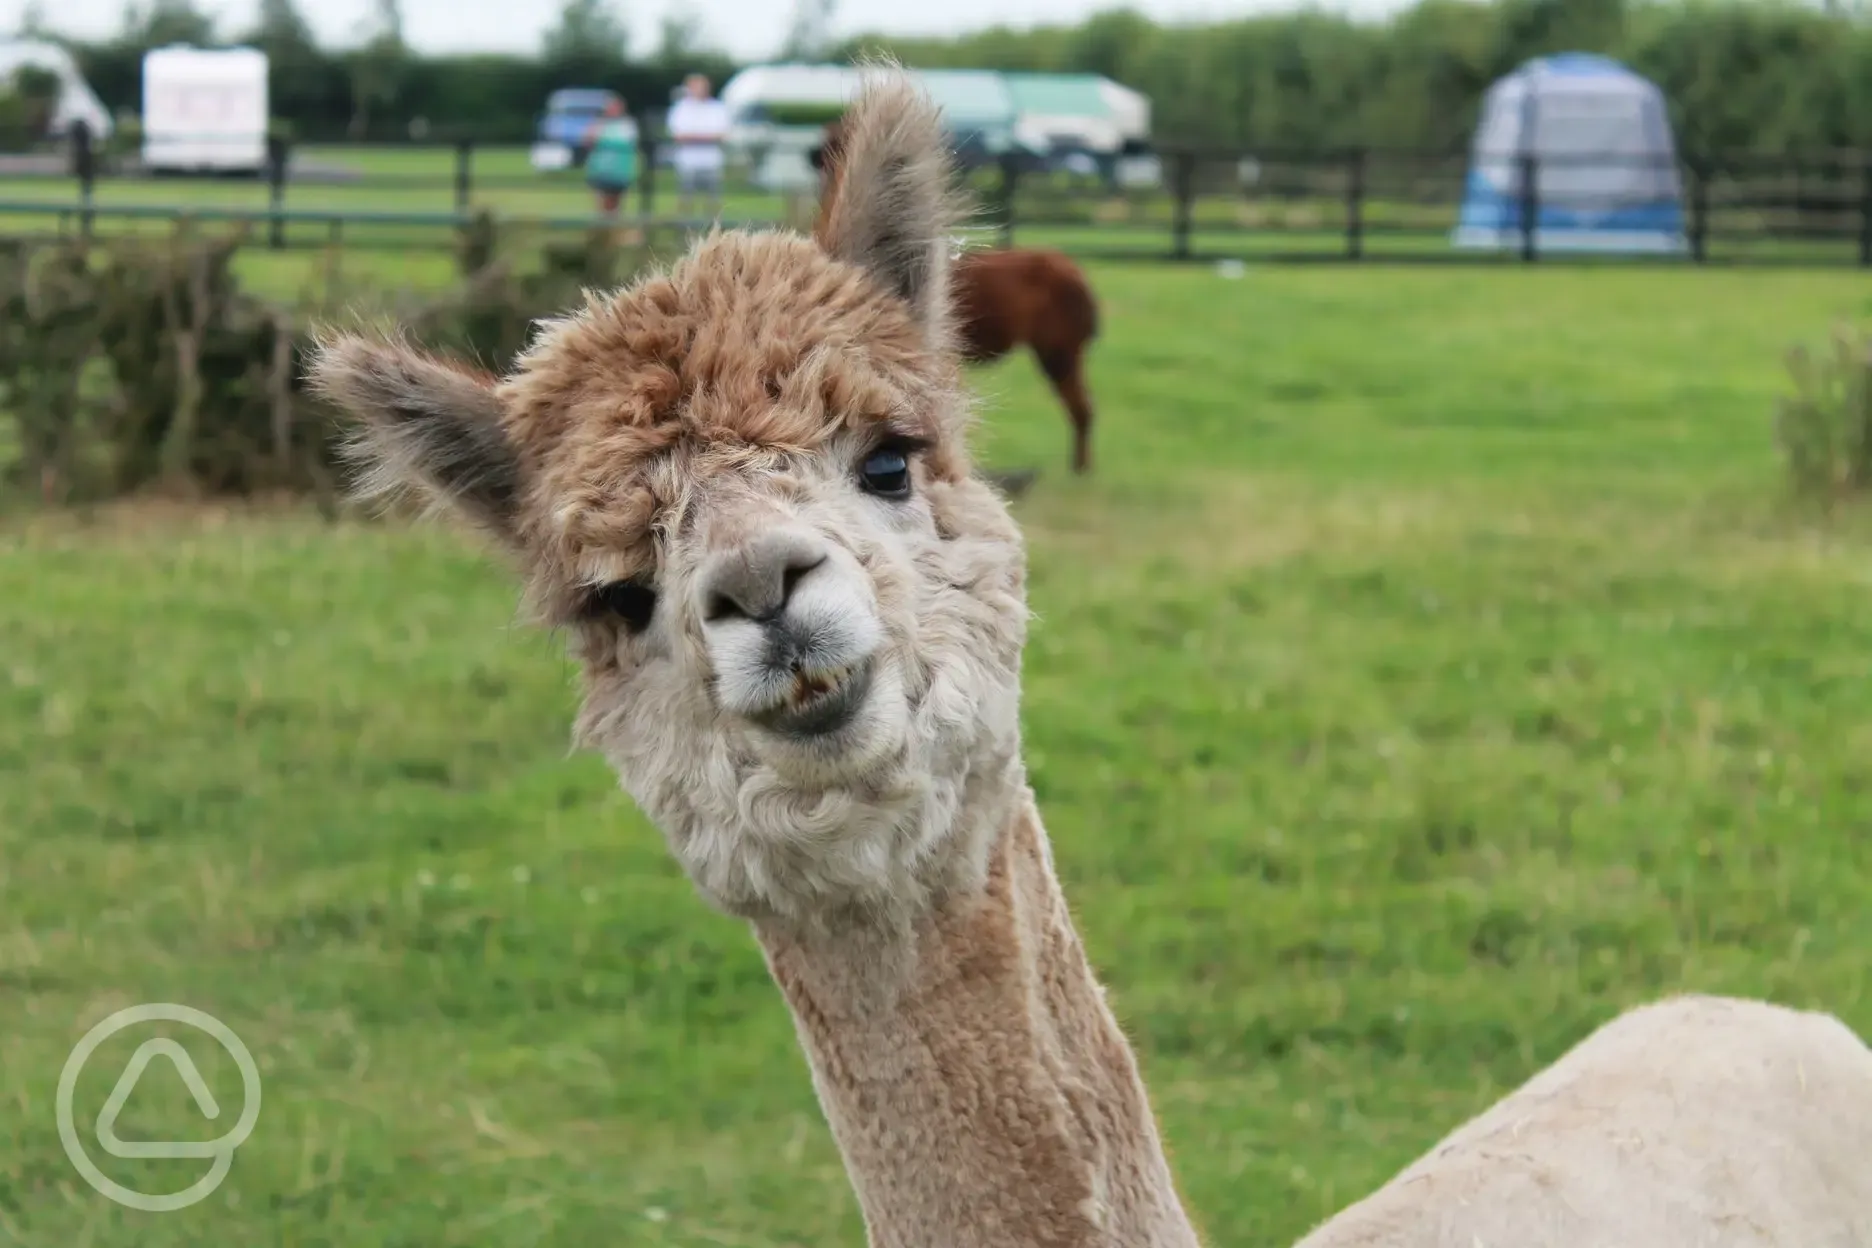 Another Alpaca Because you cant have enough pictures